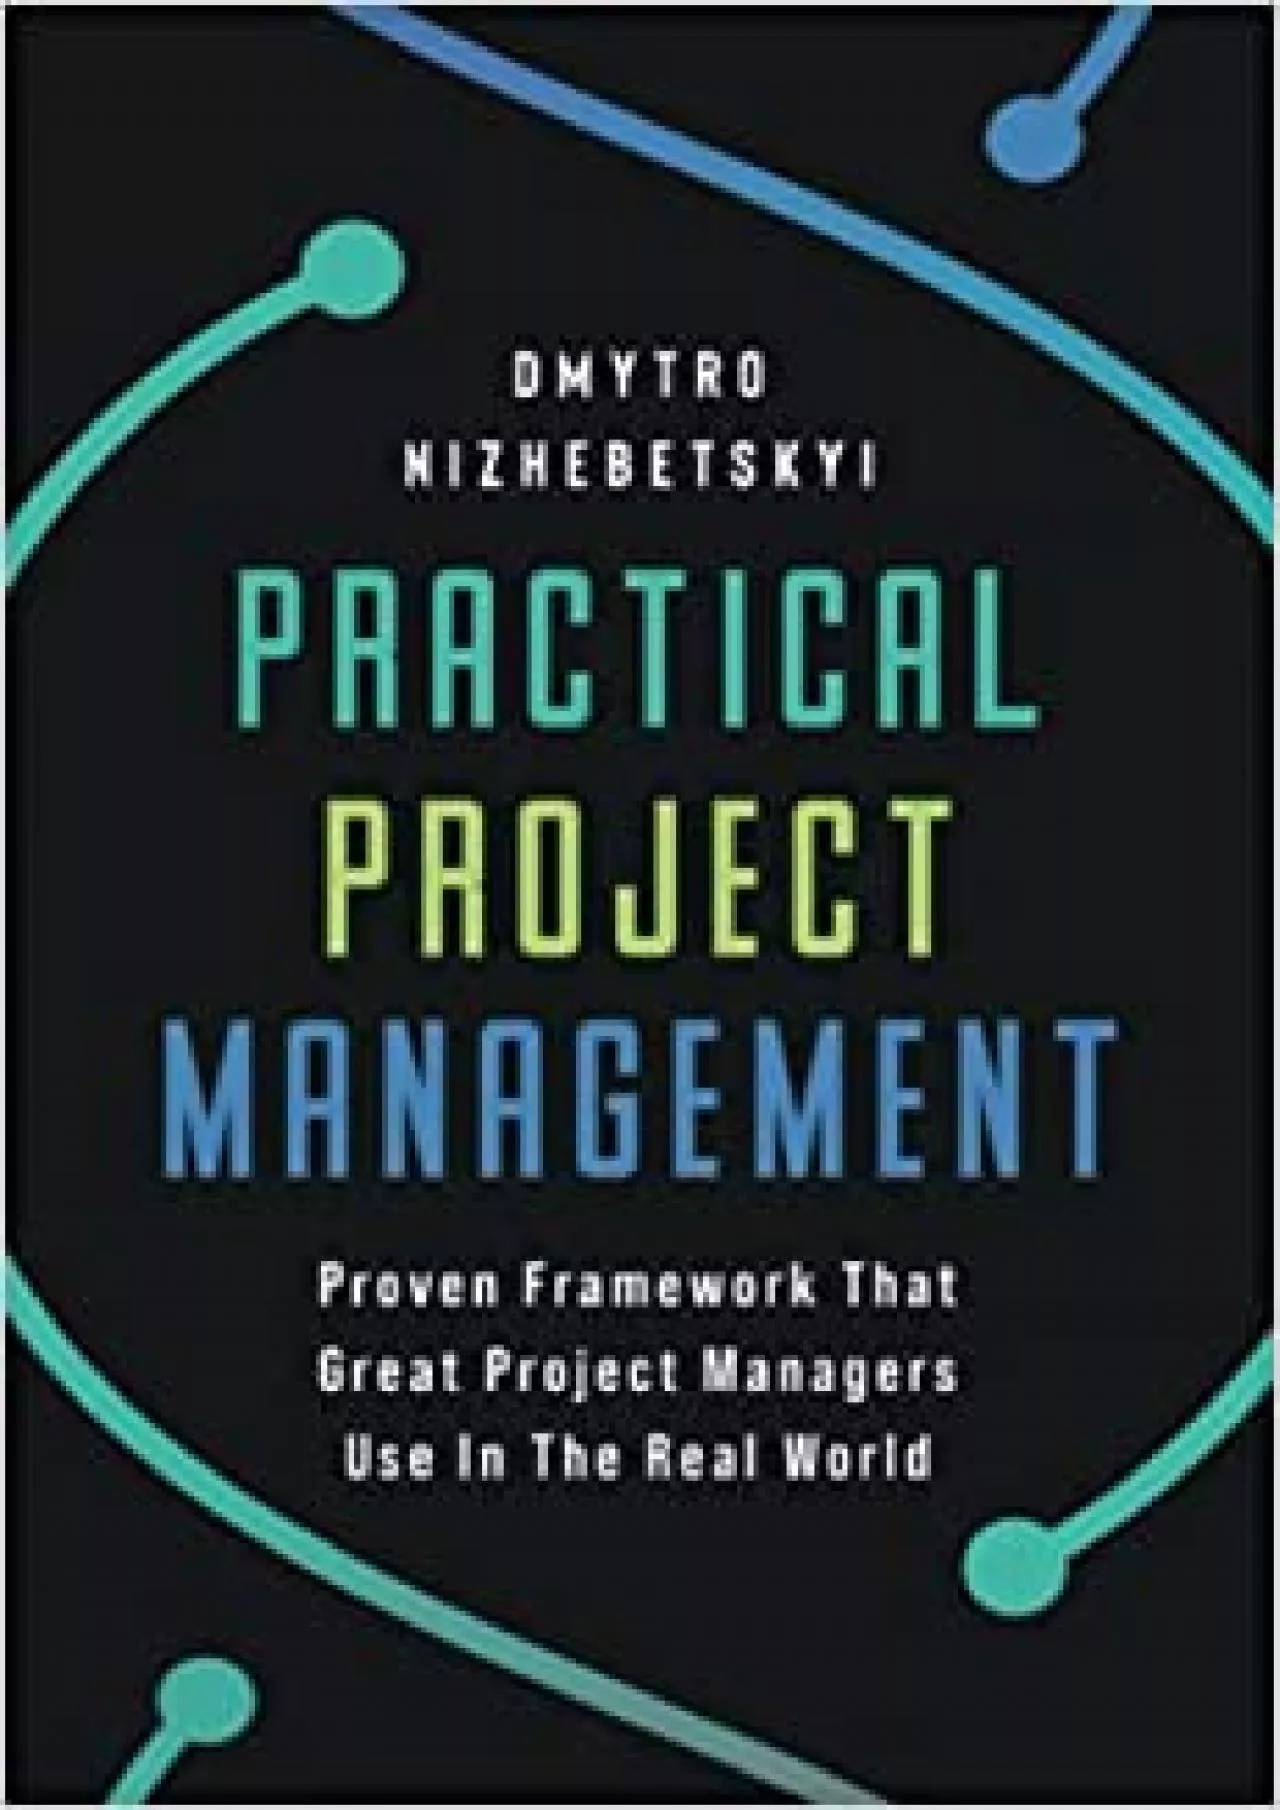 Practical Project Management: Proven Framework That Great Project Managers Use In the